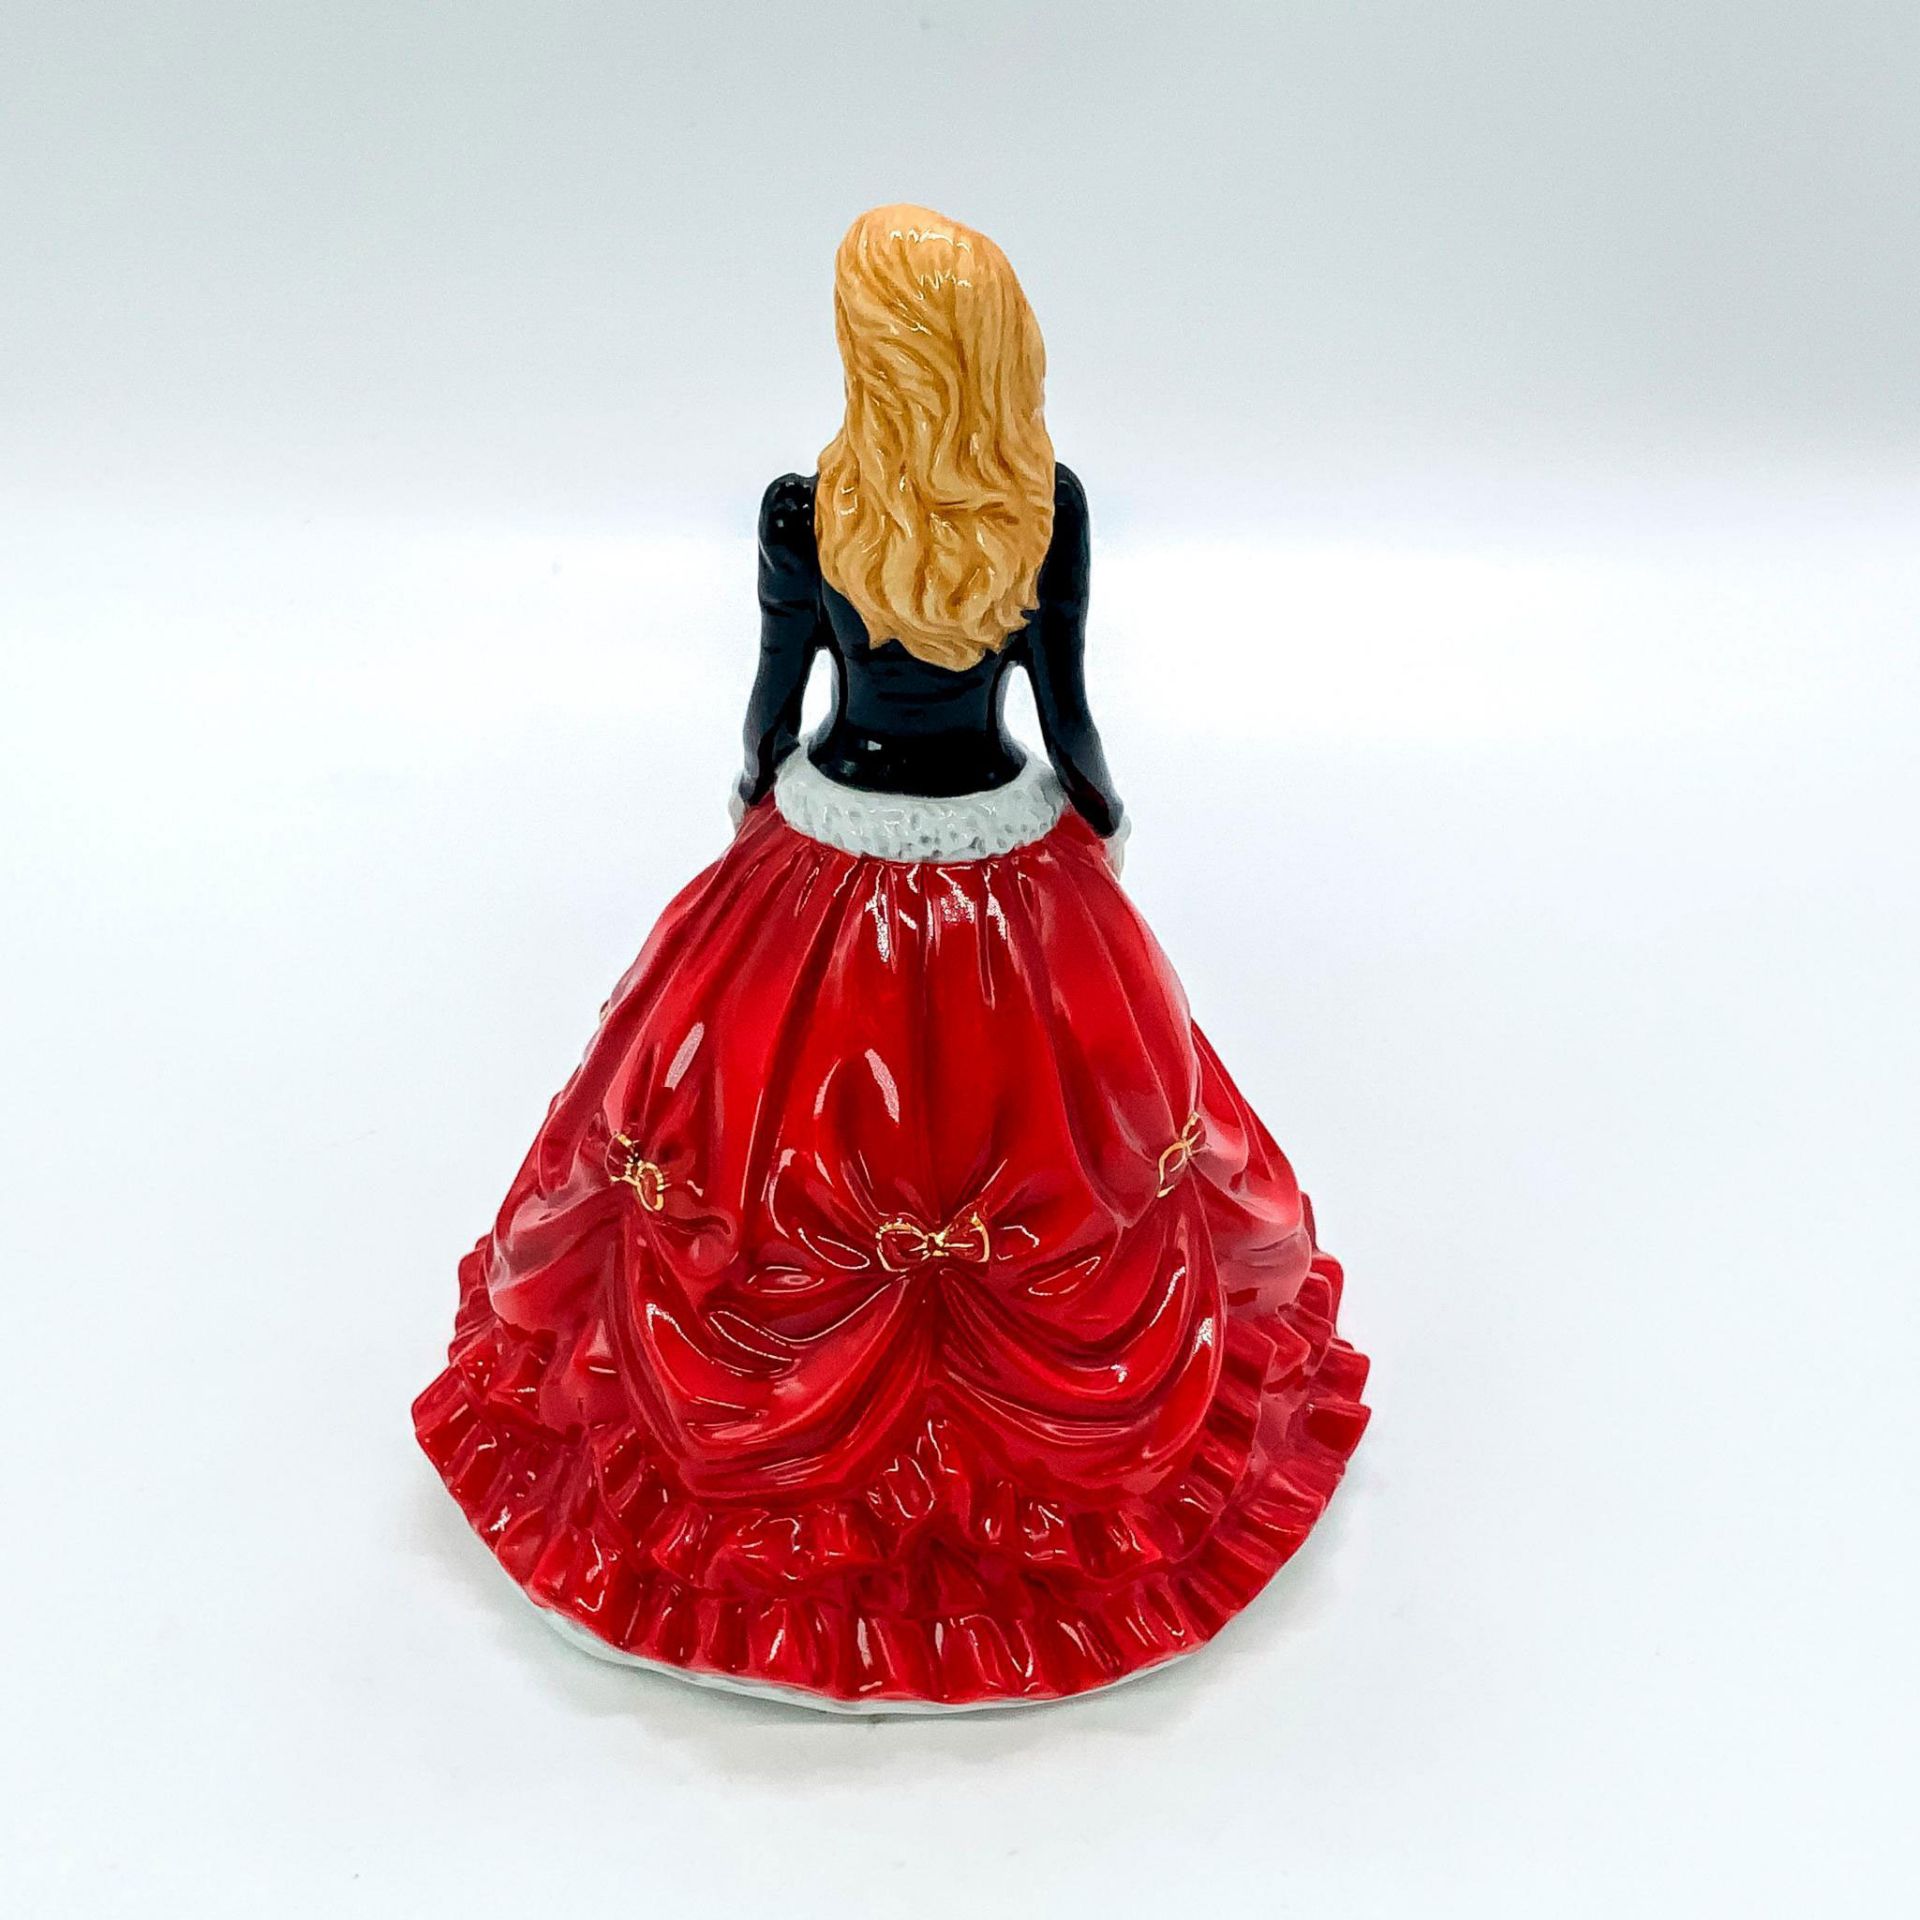 Festive Stroll 2017 Christmas Day Petite of the Year - HN5854 - Royal Doulton Figurine - Image 3 of 4